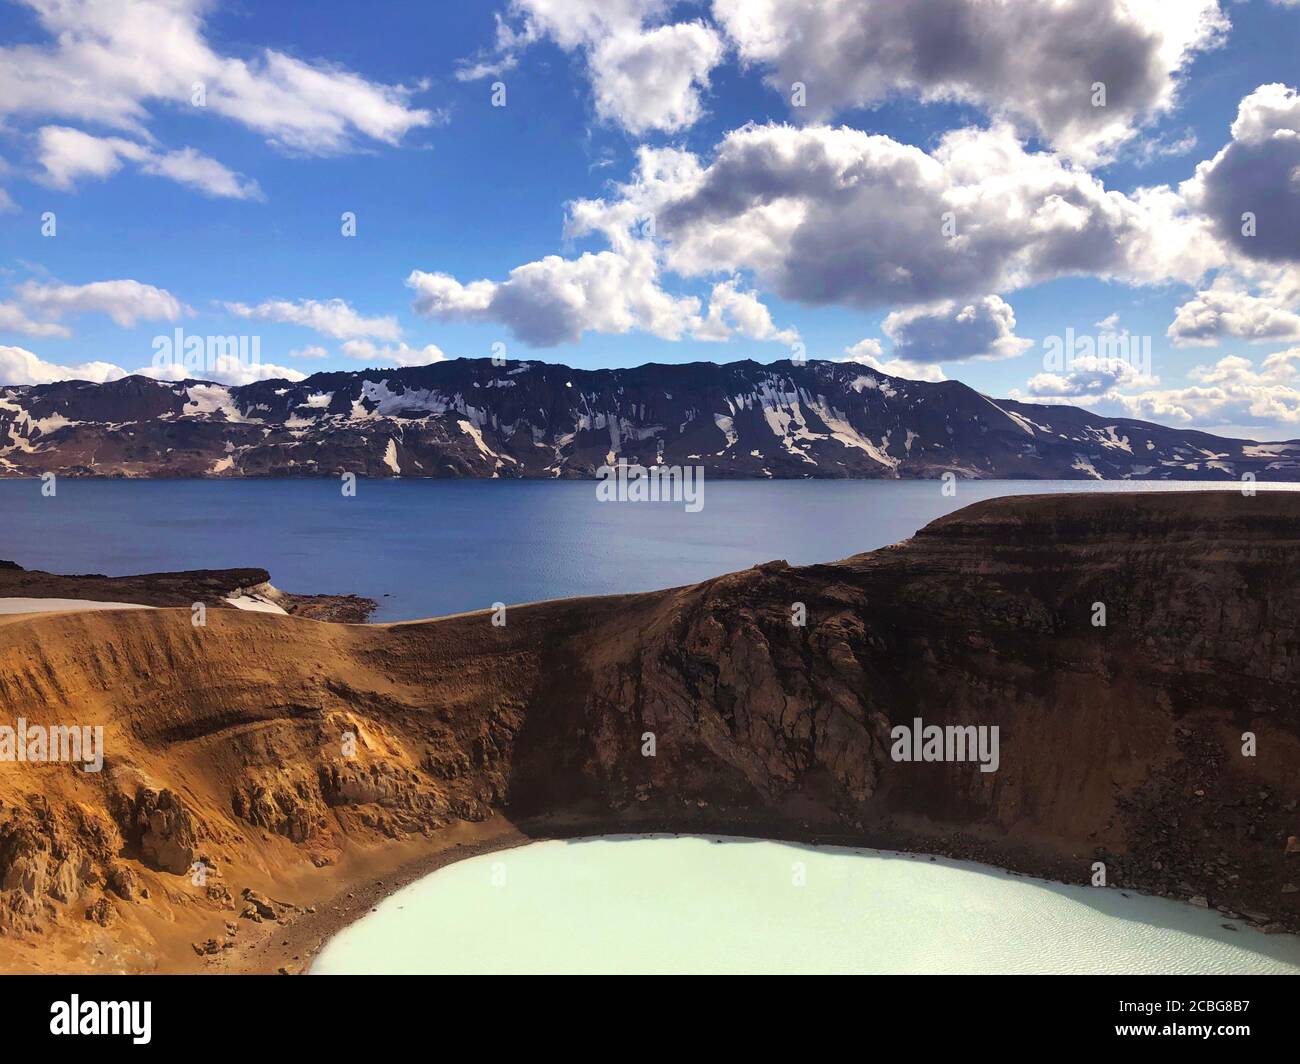 View of Viti Crater of Krafla Caldera with Geothermal Lake and Mountains in the Distance Stock Photo